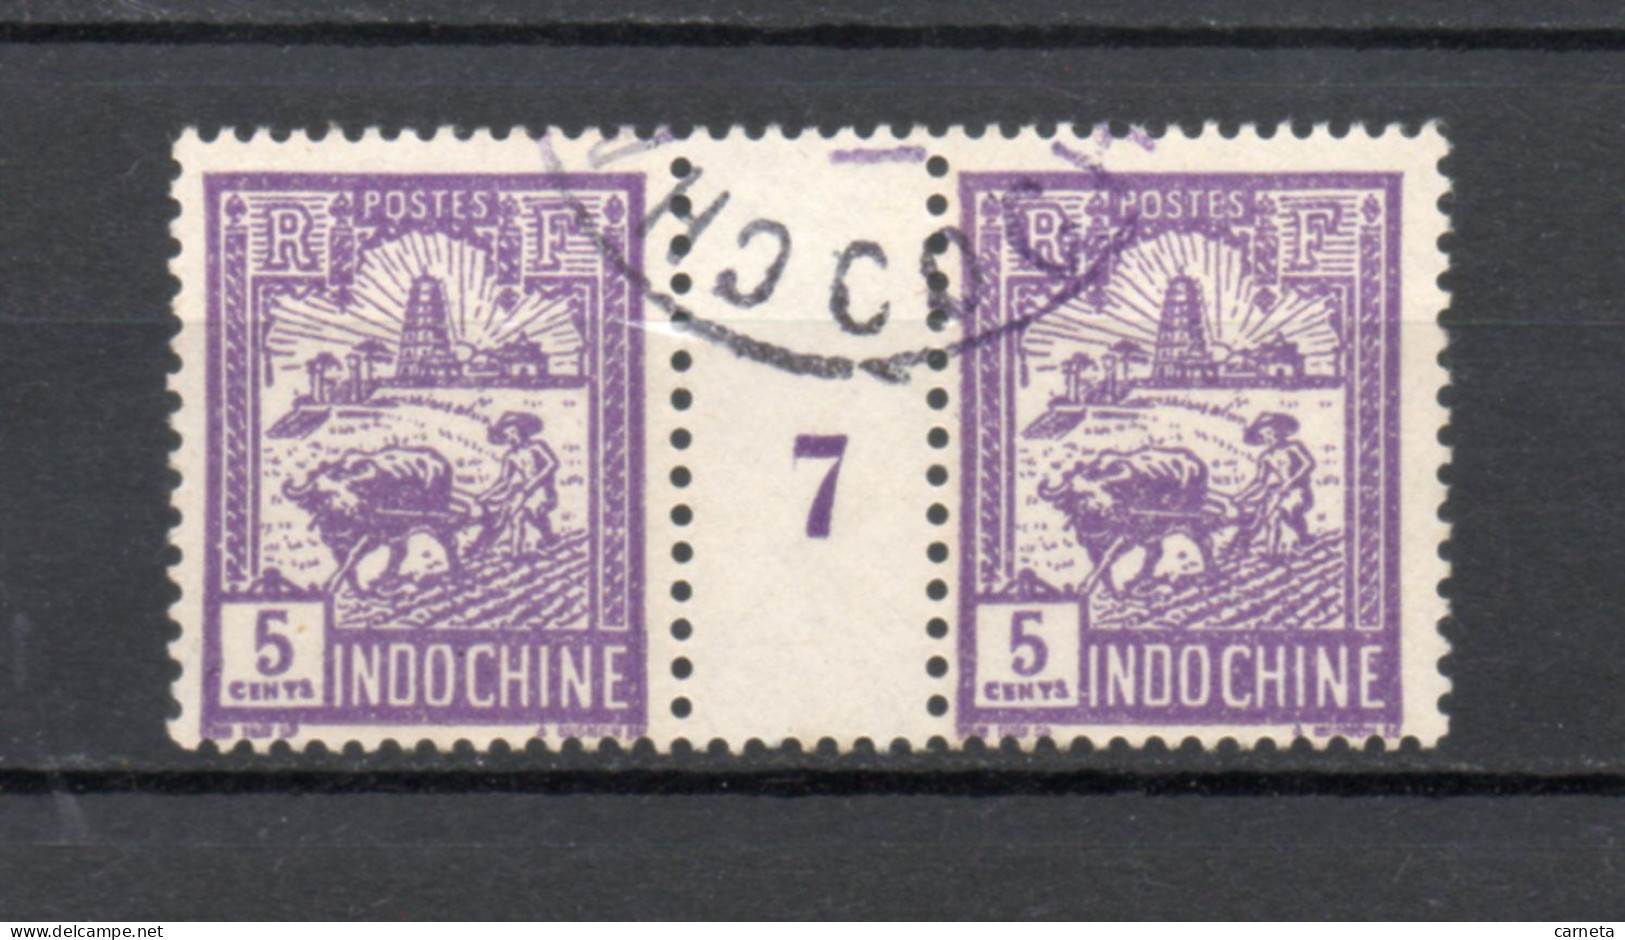 INDOCHINE  N° 131 MILLESIME 7   OBLITERE  COTE 11.00€   AGRICULTURE LABOUREUR - Used Stamps